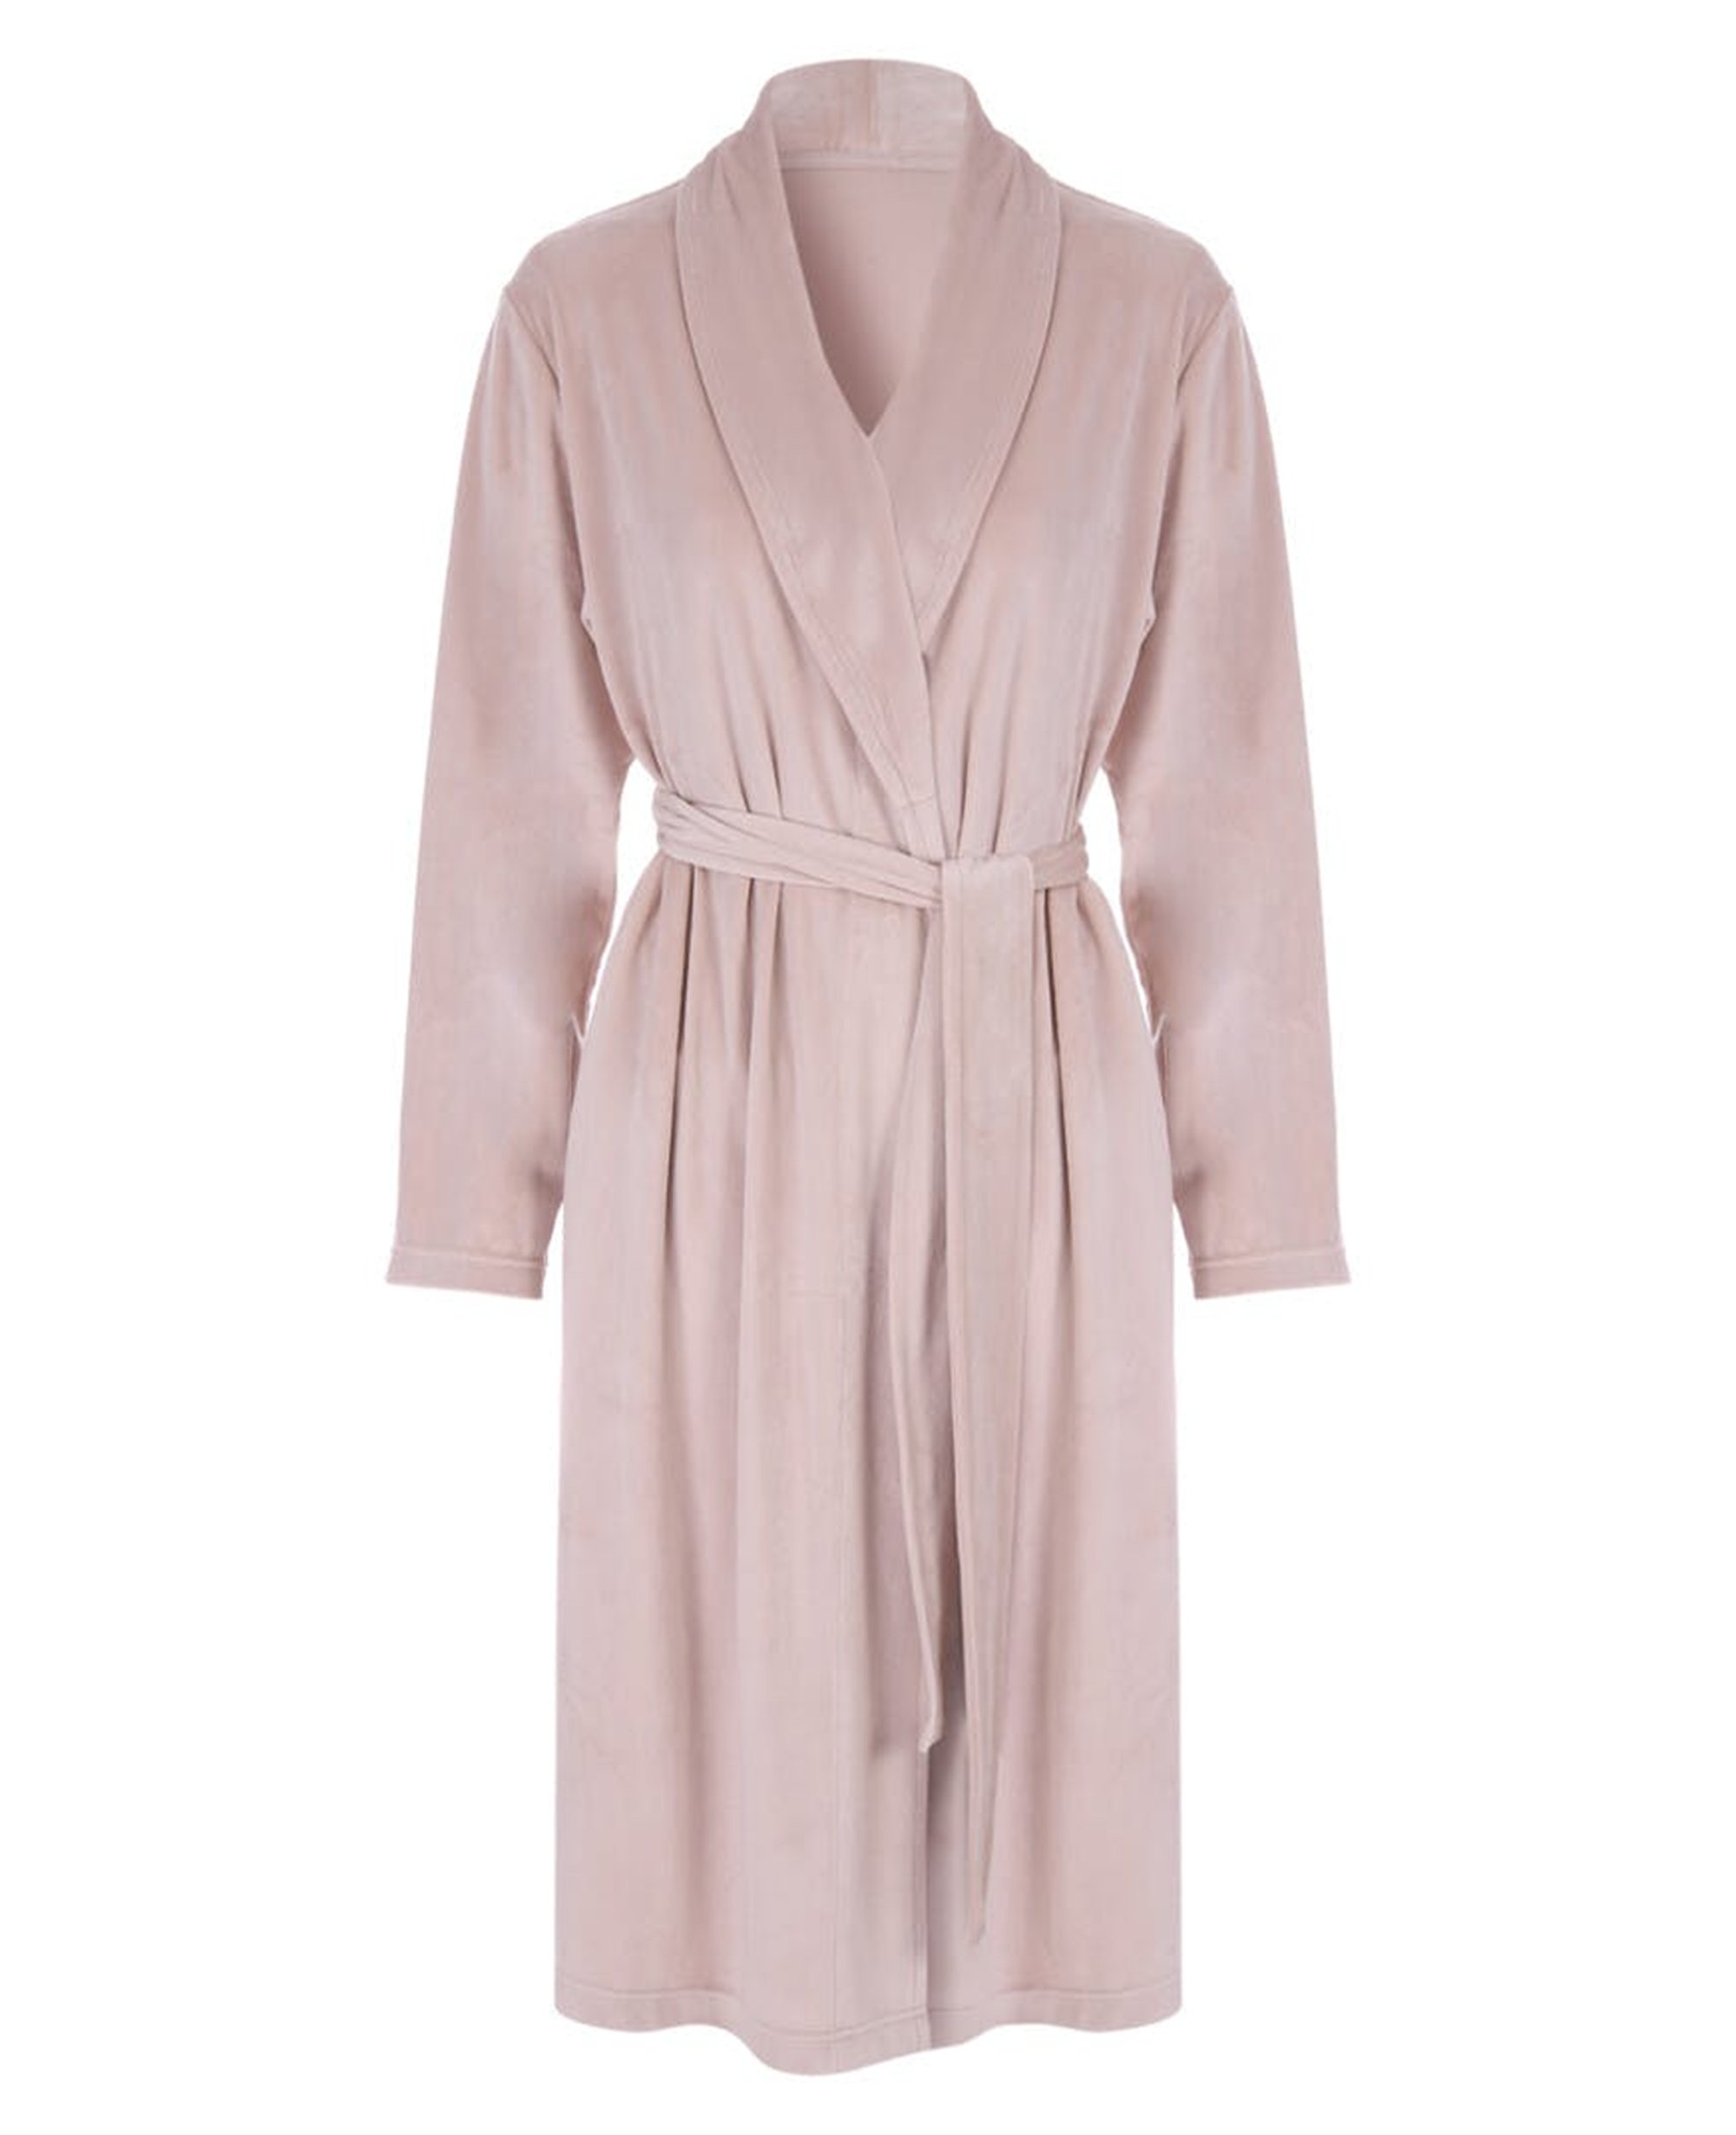 You guys!!!!! I found the best skims robe dupe ever! I'm in shock at how  soft and luxurious this robe set is from @fashion 😻 n